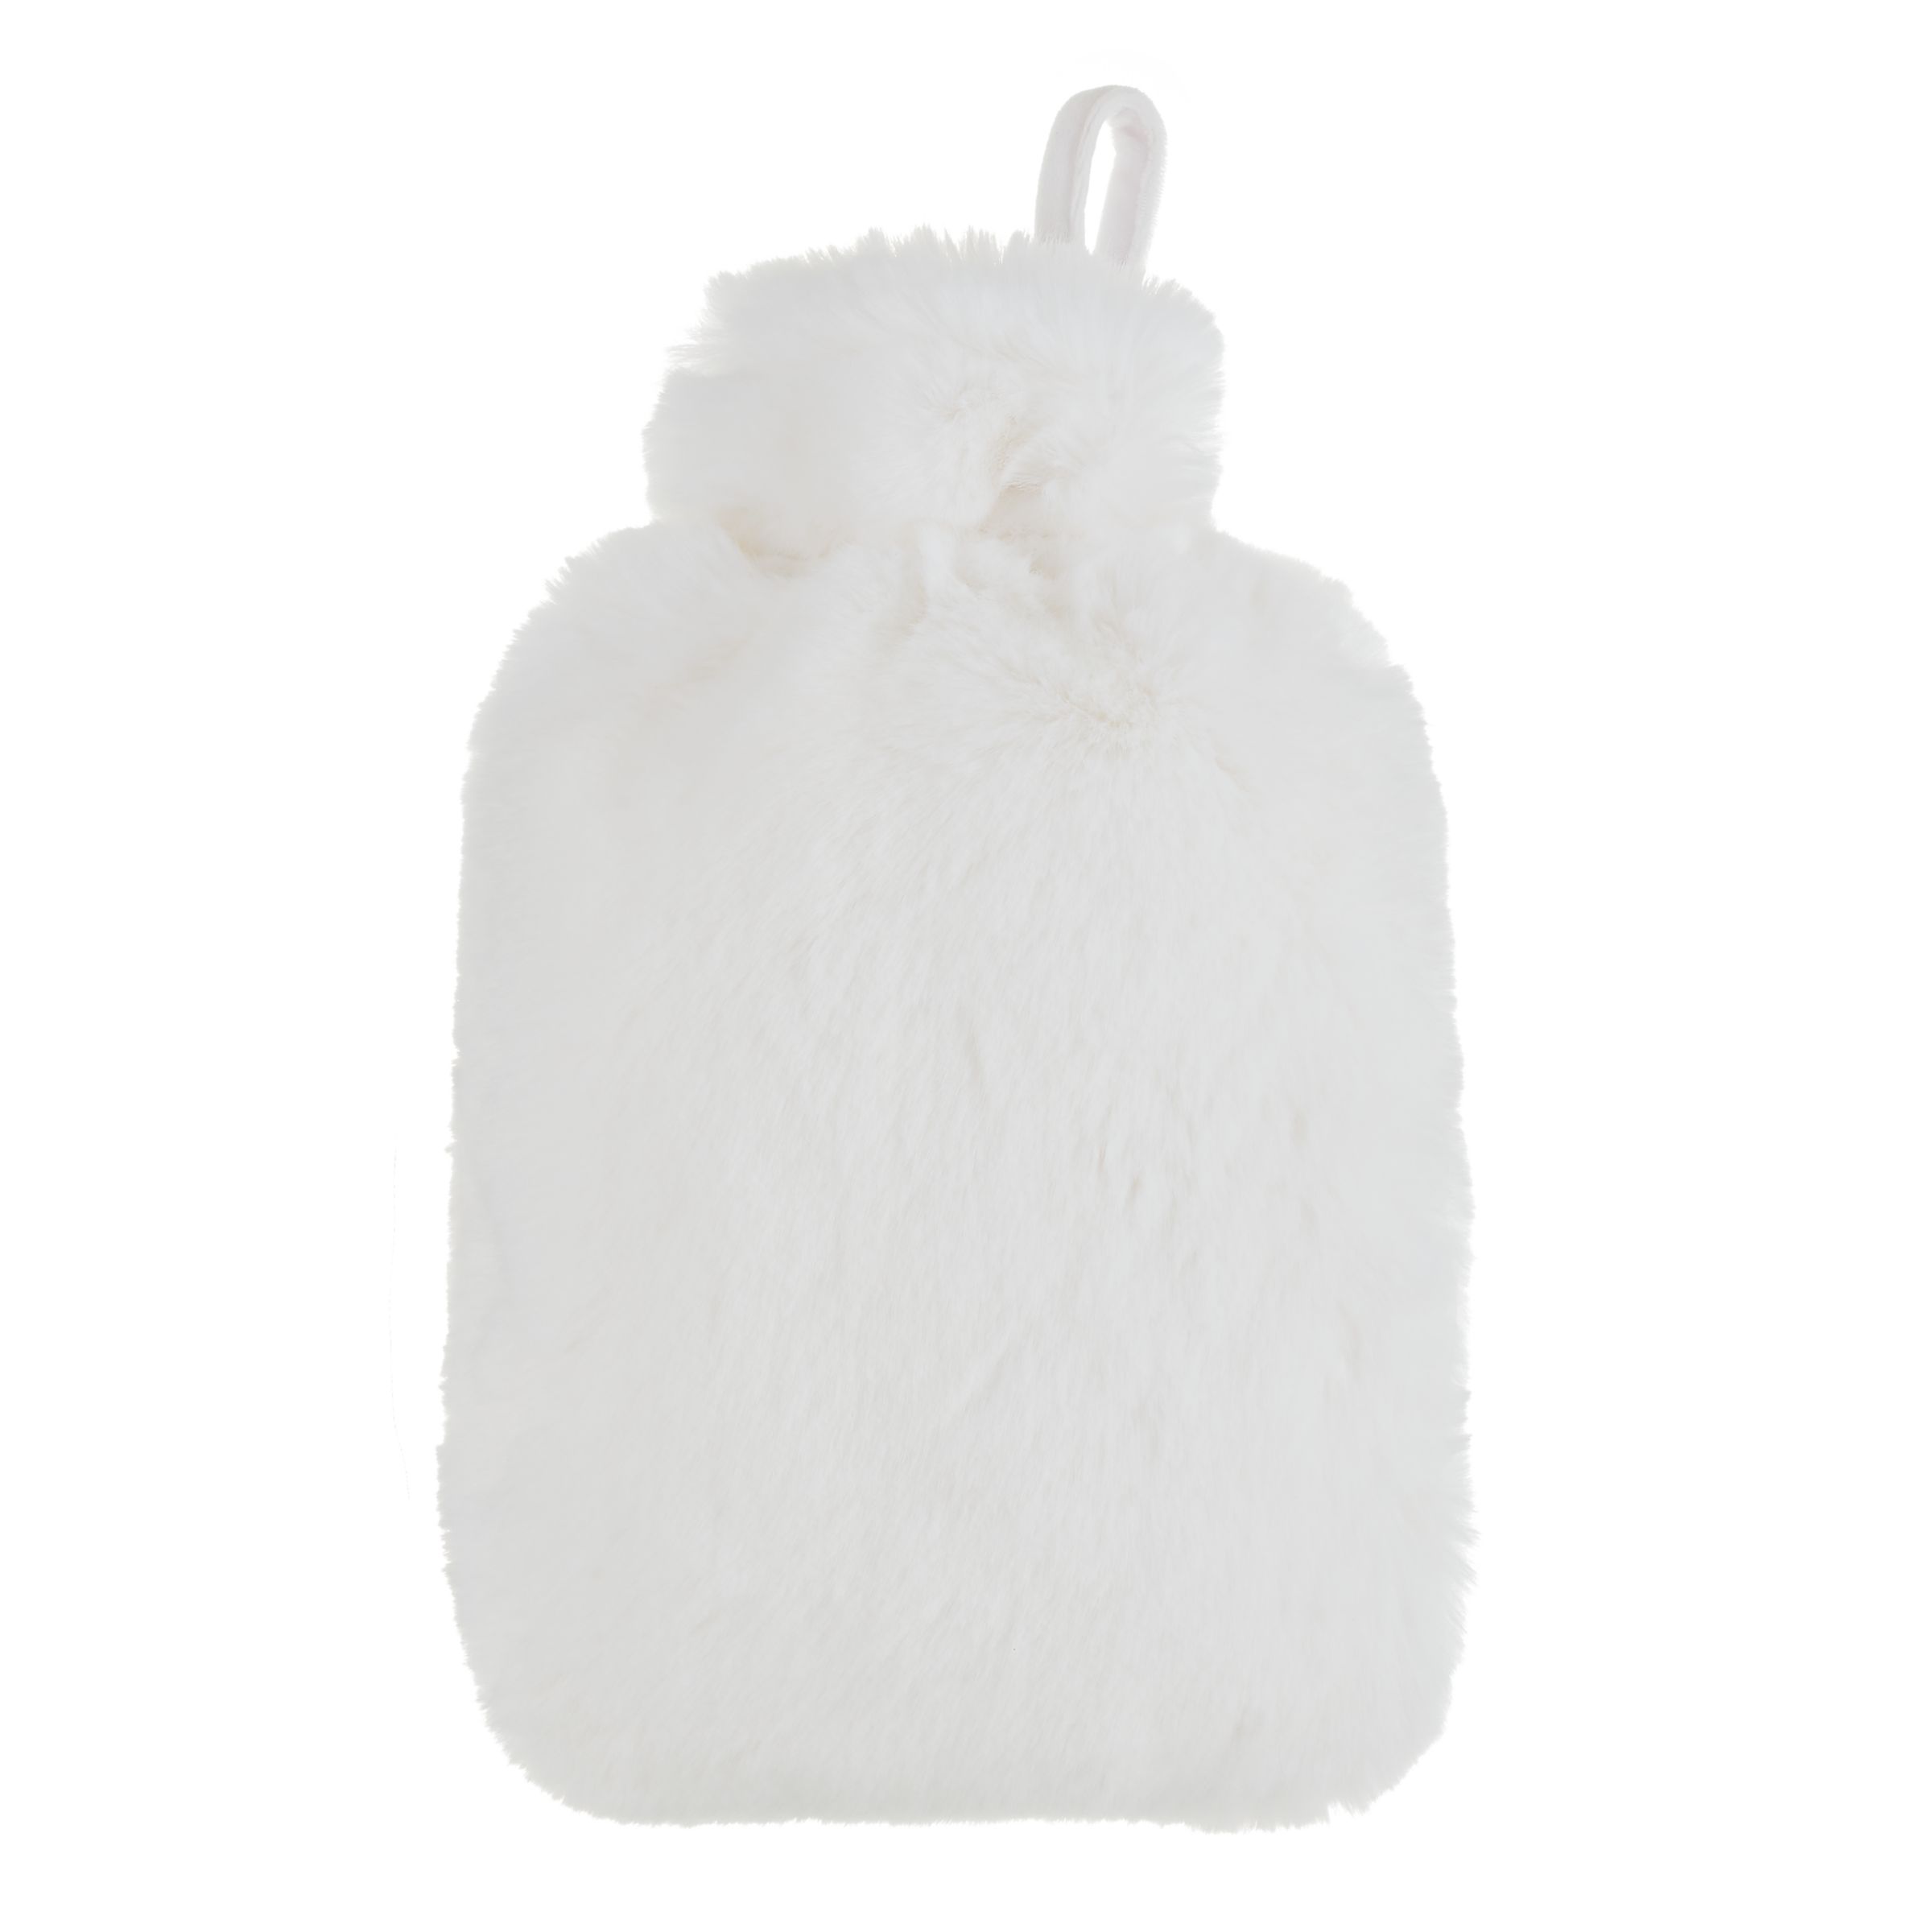 John Lewis & Partners Hot Water Bottle and Cover